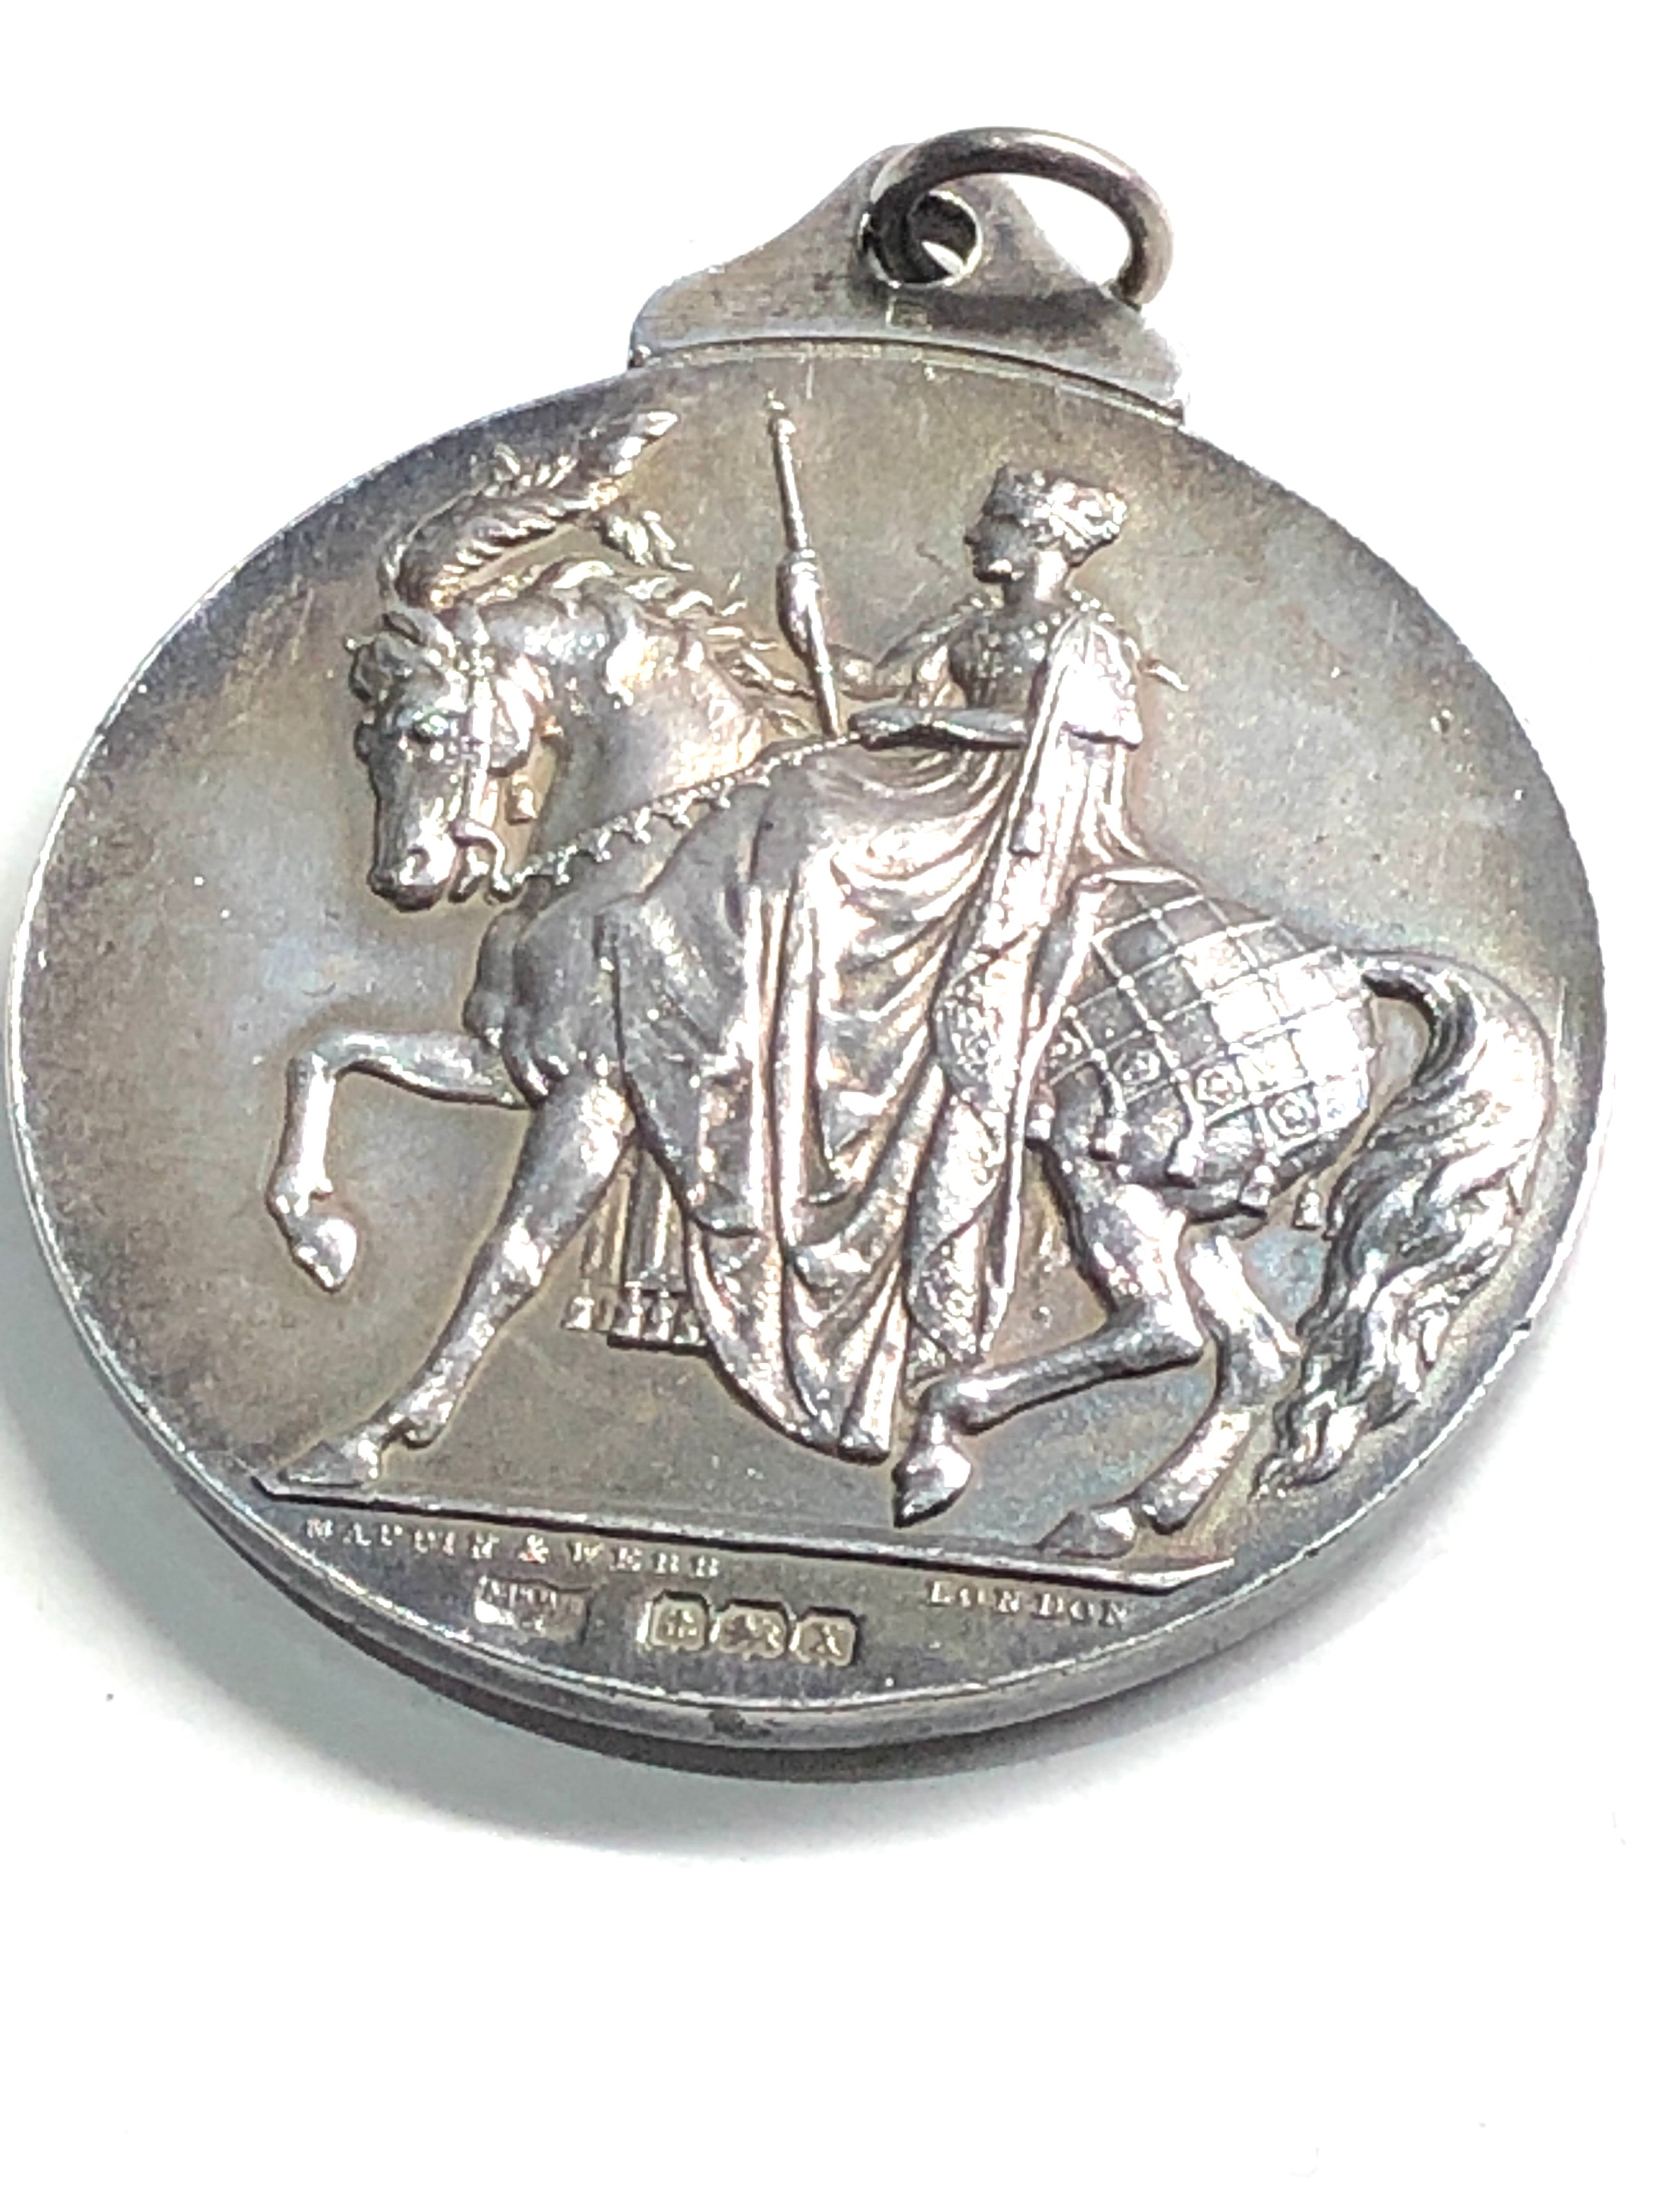 Antique silver shire horse society medal - Image 2 of 3